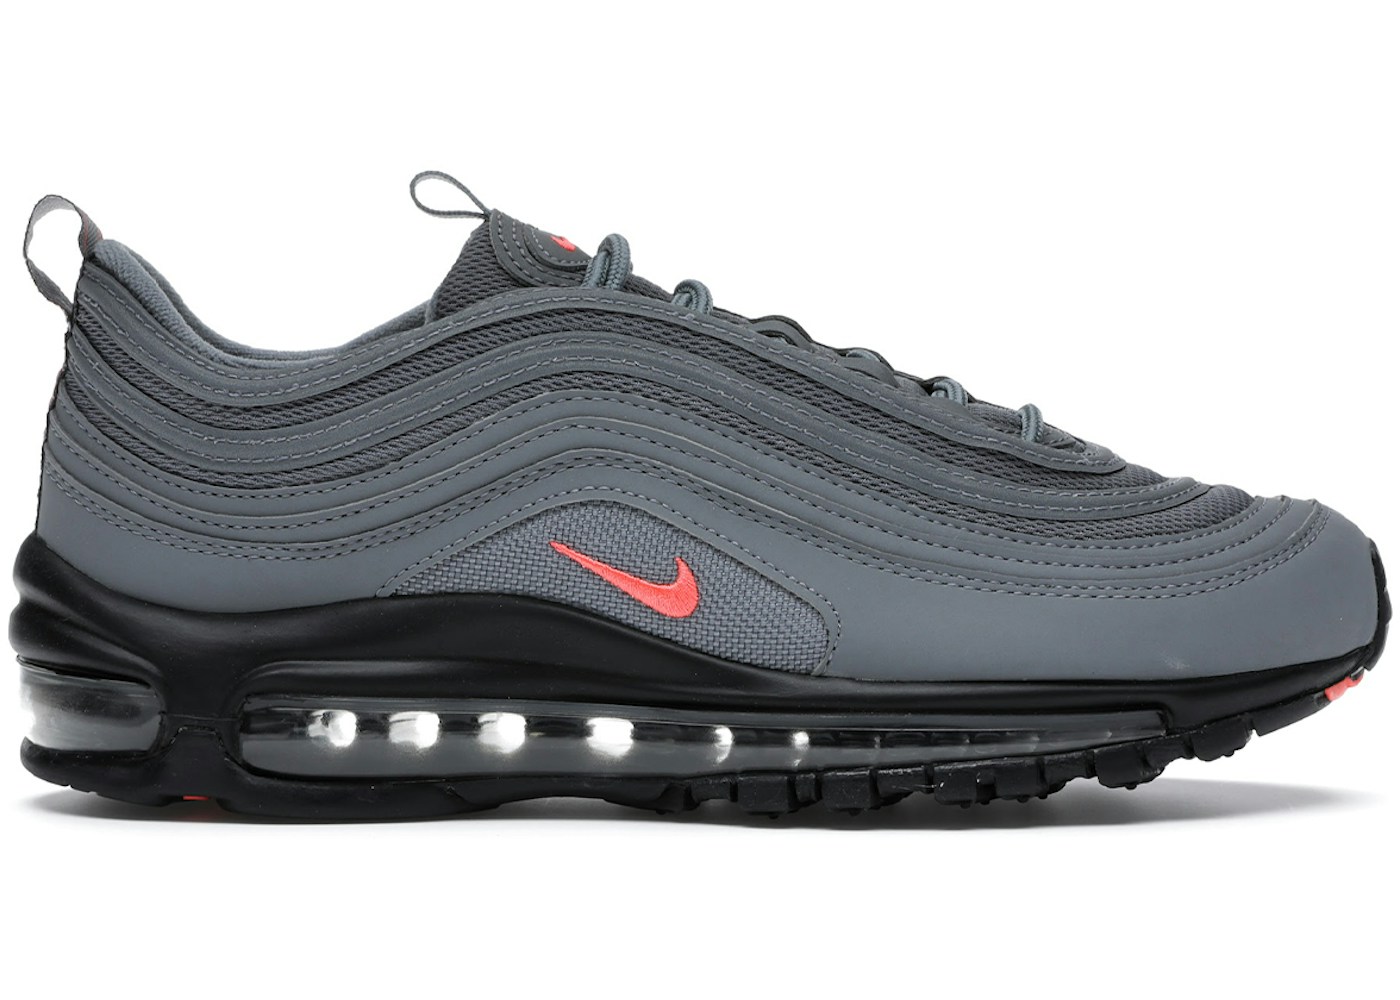 Nike Air Max 97.css-7ouhme{font-family:var(--chakra-fonts-suisseIntlMedium);font-weight:500;line-height:var(--chakra-lineHeights-xl);min-height:0vw;font-size:var(--chakra-fontSizes-md);display:block;color:var(--chakra-colors-neutral-500);margin-top:var(--chakra-space-1);}@media screen and (min-width: 62em){.css-7ouhme{font-size:var(--chakra-fontSizes-lg);}}Dark Grey Black Crimson (GS)